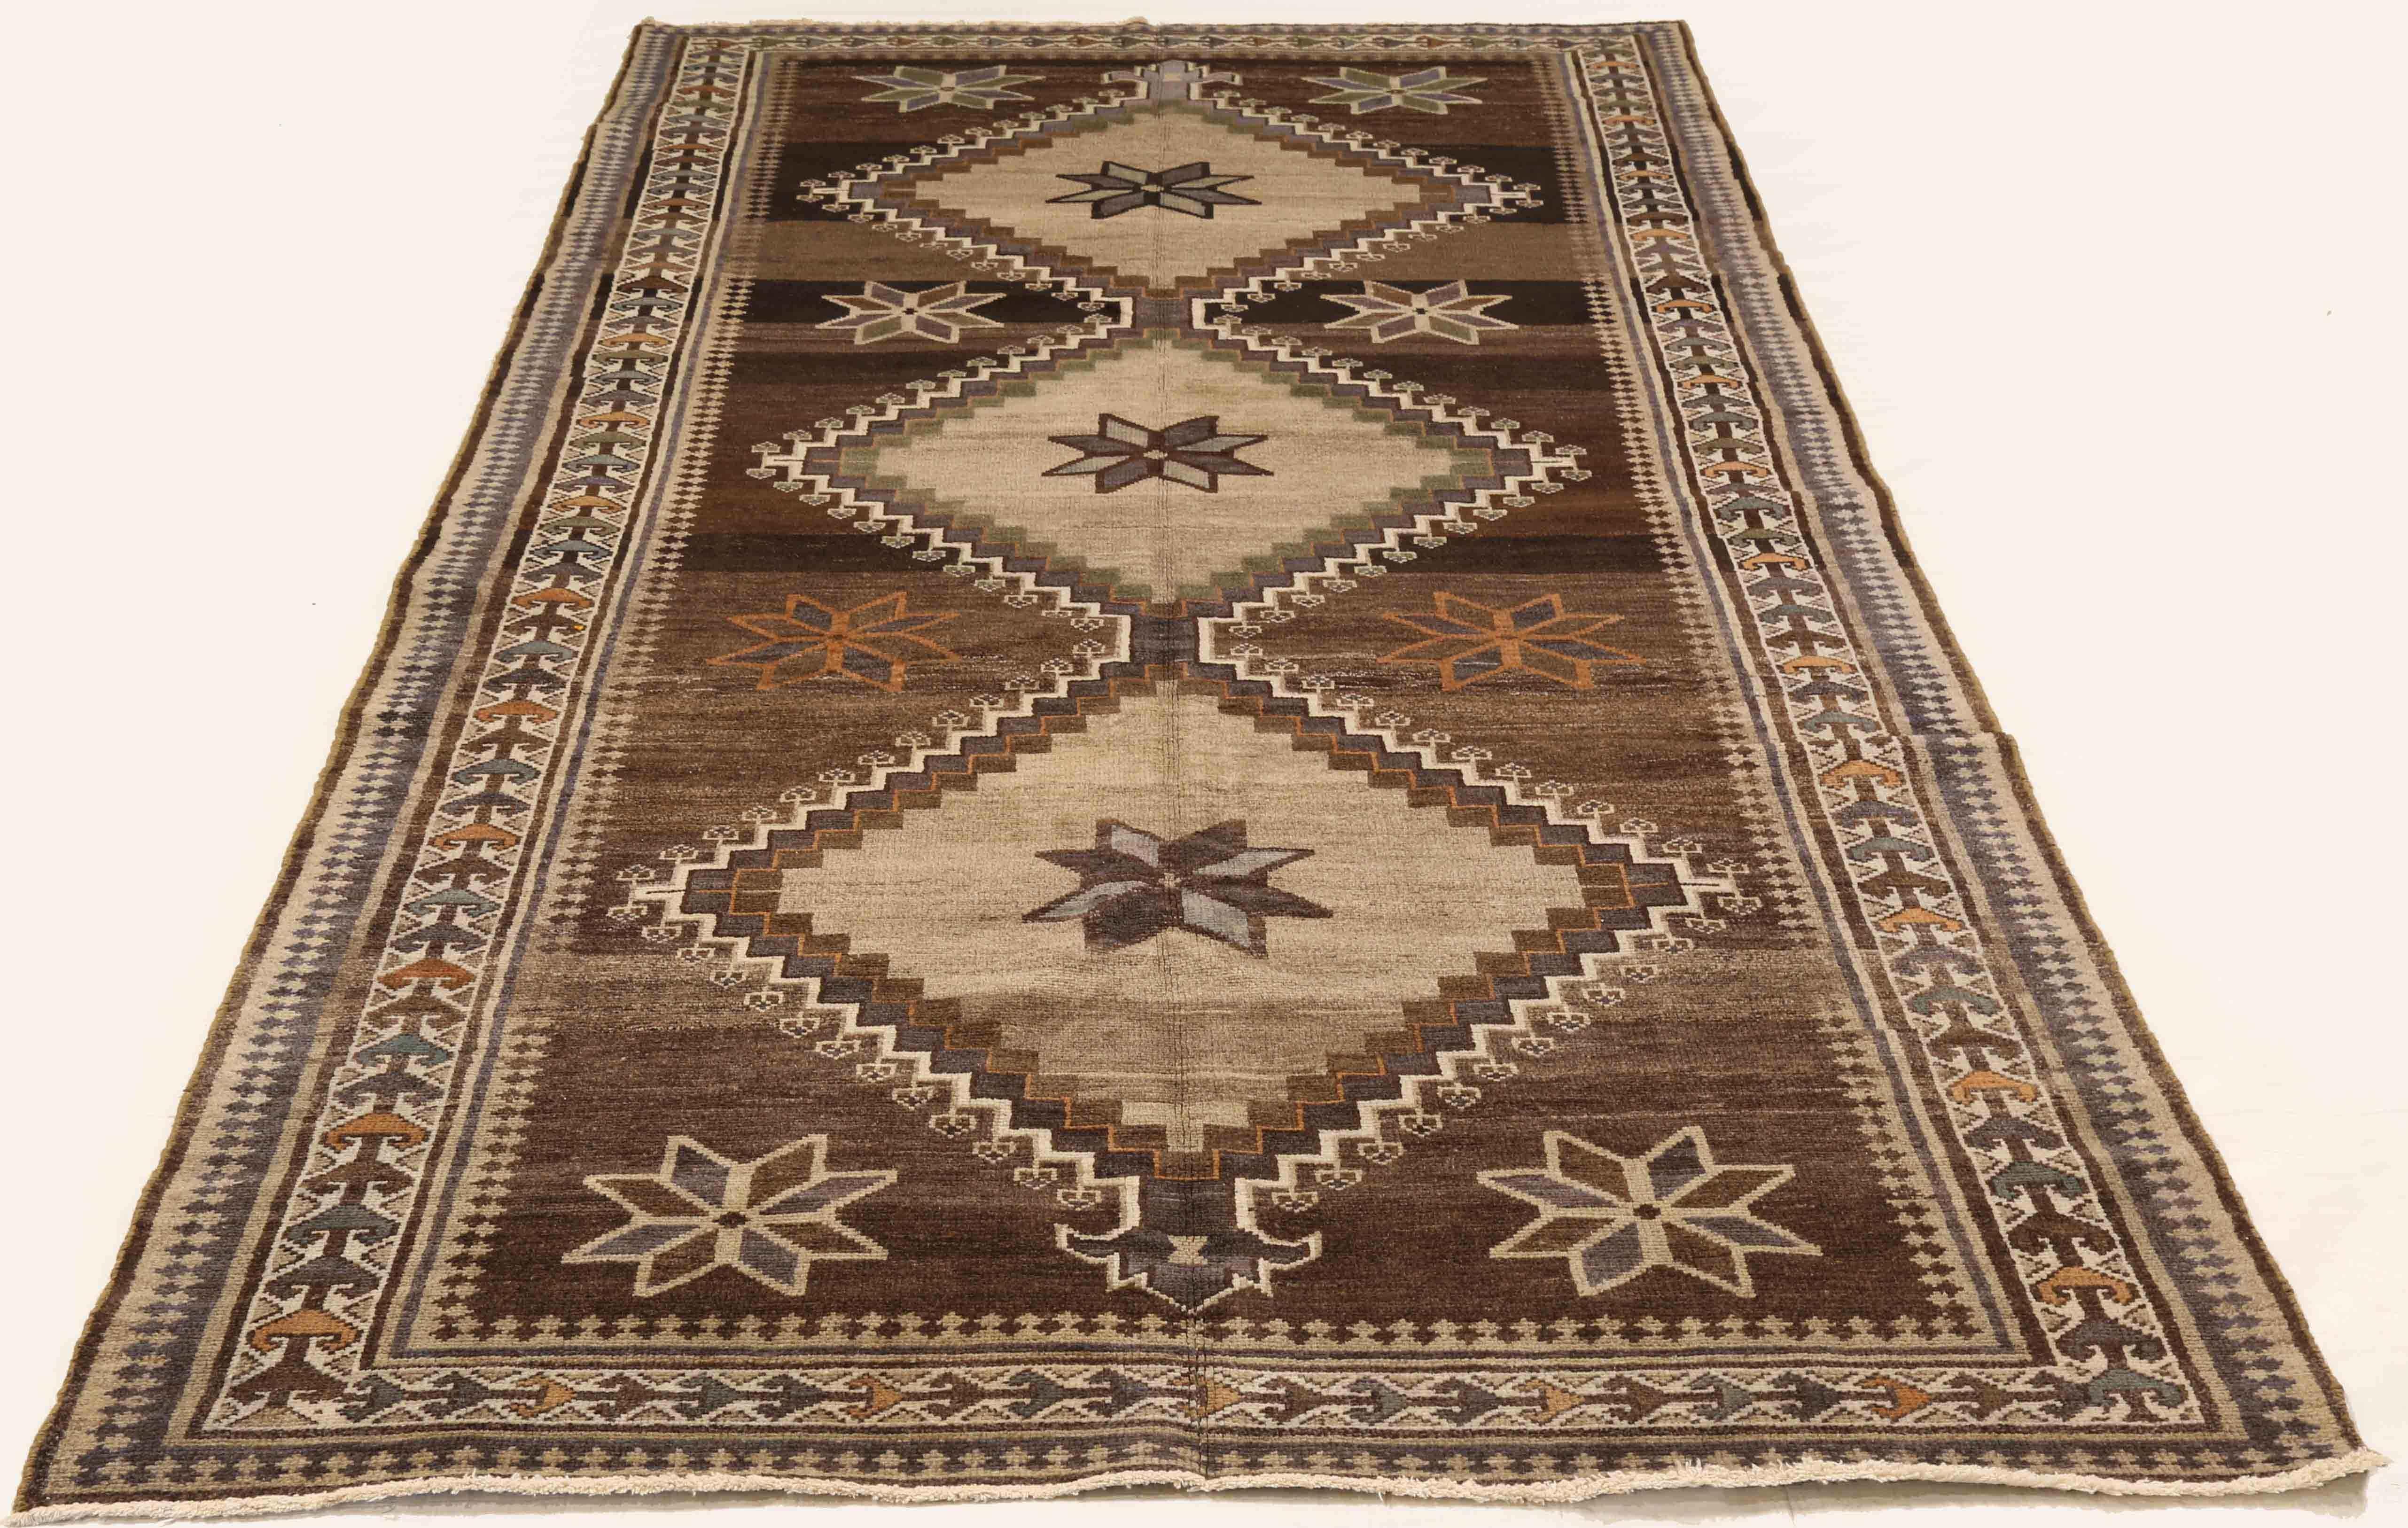 Antique Persian rug handwoven from the finest sheep’s wool. It’s colored with all-natural vegetable dyes that are safe for humans and pets. It’s a traditional Malayer design featuring brown and beige floral details over an ivory field. It’s a lovely